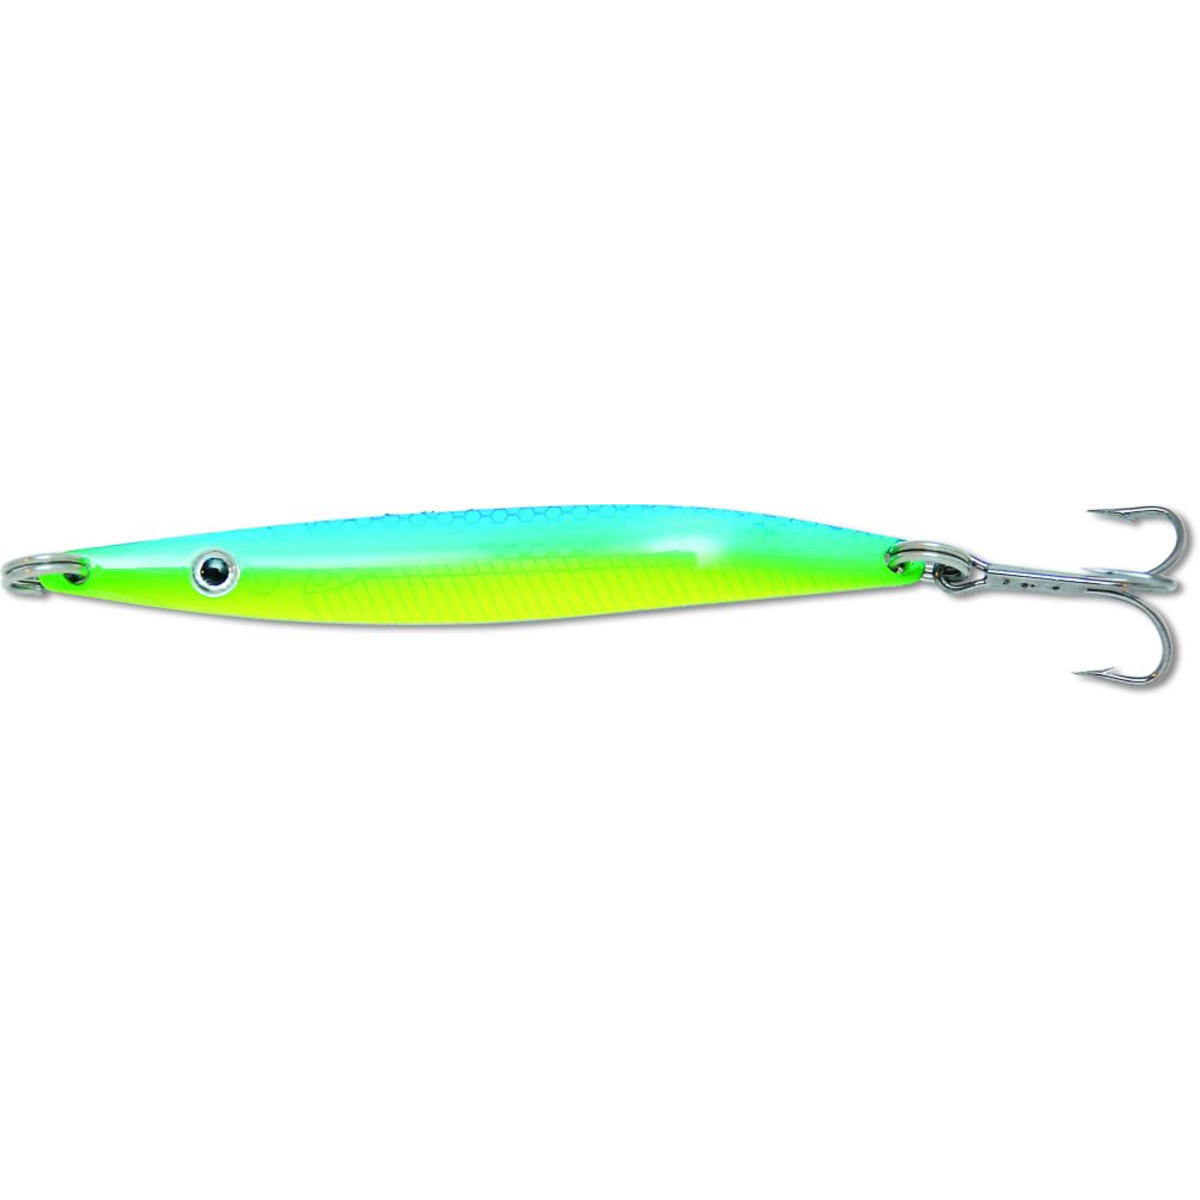 Zebco Impact Spoon - 16 g - blue/chartreuse